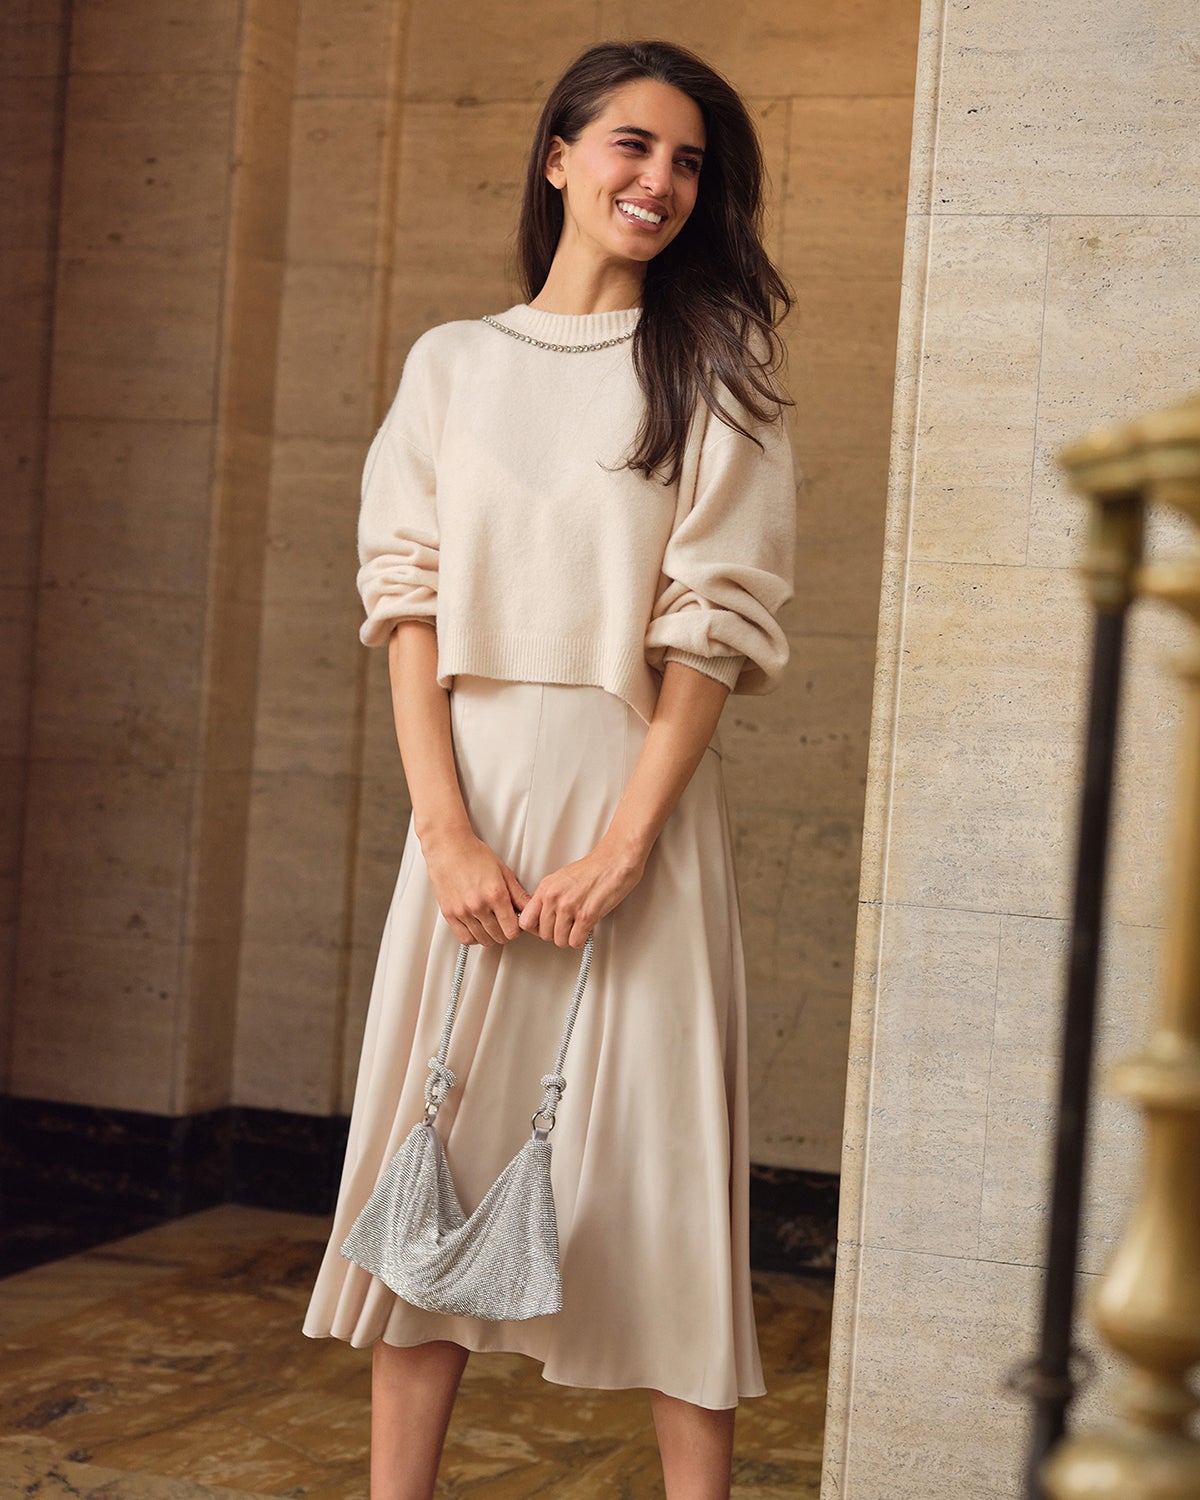 Woman smiling to the side while wearing cream-colored sweater with the sleeves rolled up, sparkly silver purse, and cream skirt